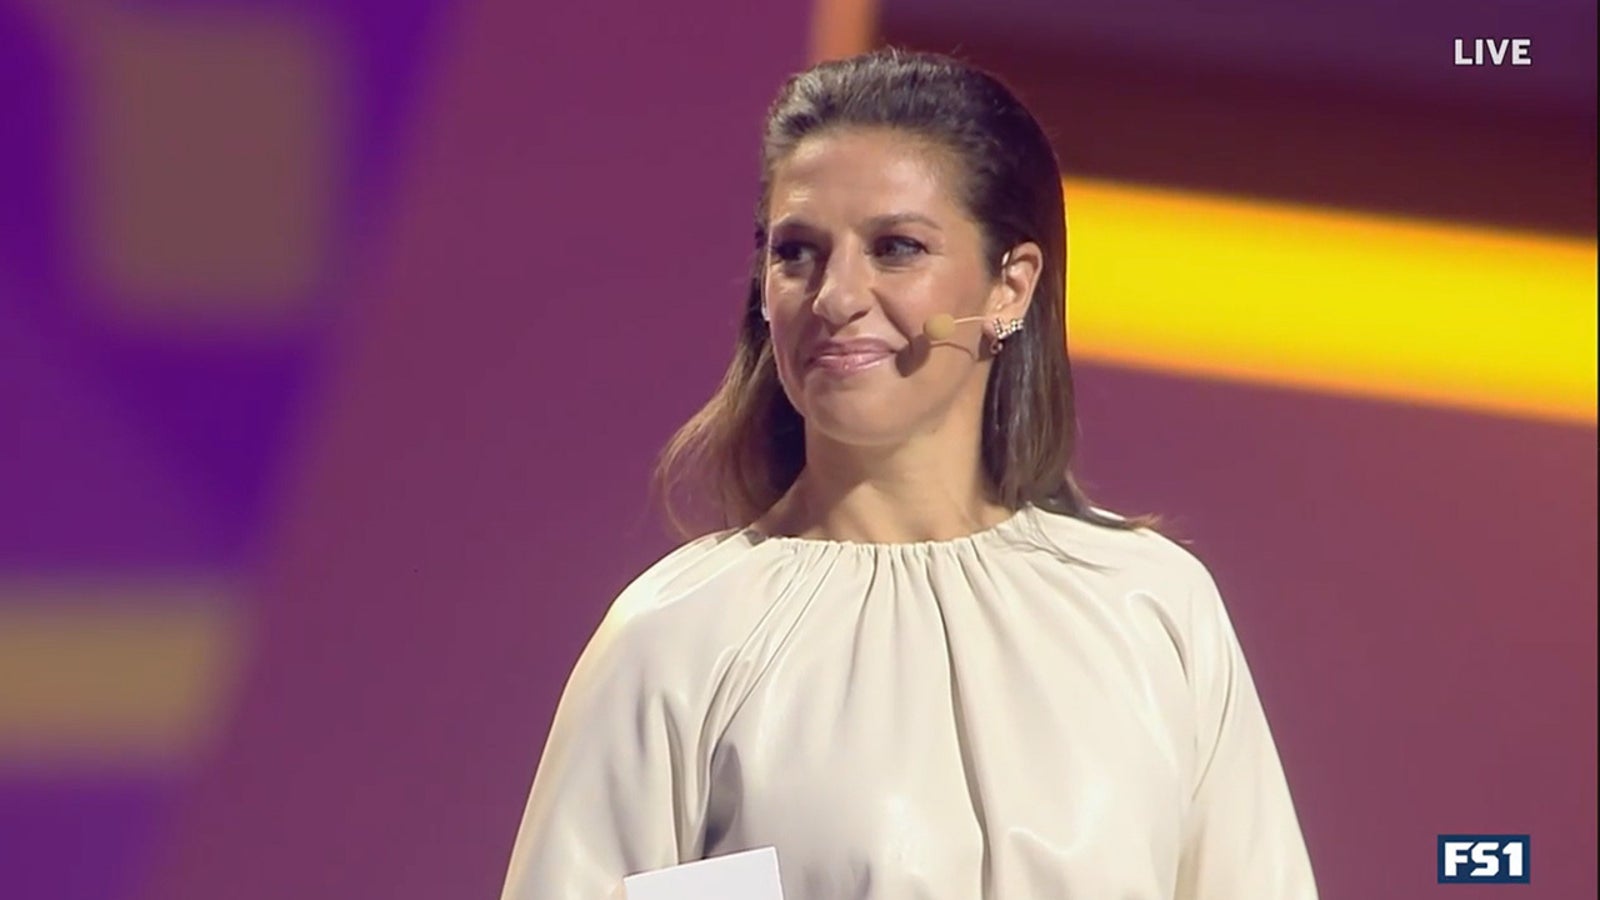 Carli Lloyd describes excitement and joy of the draw